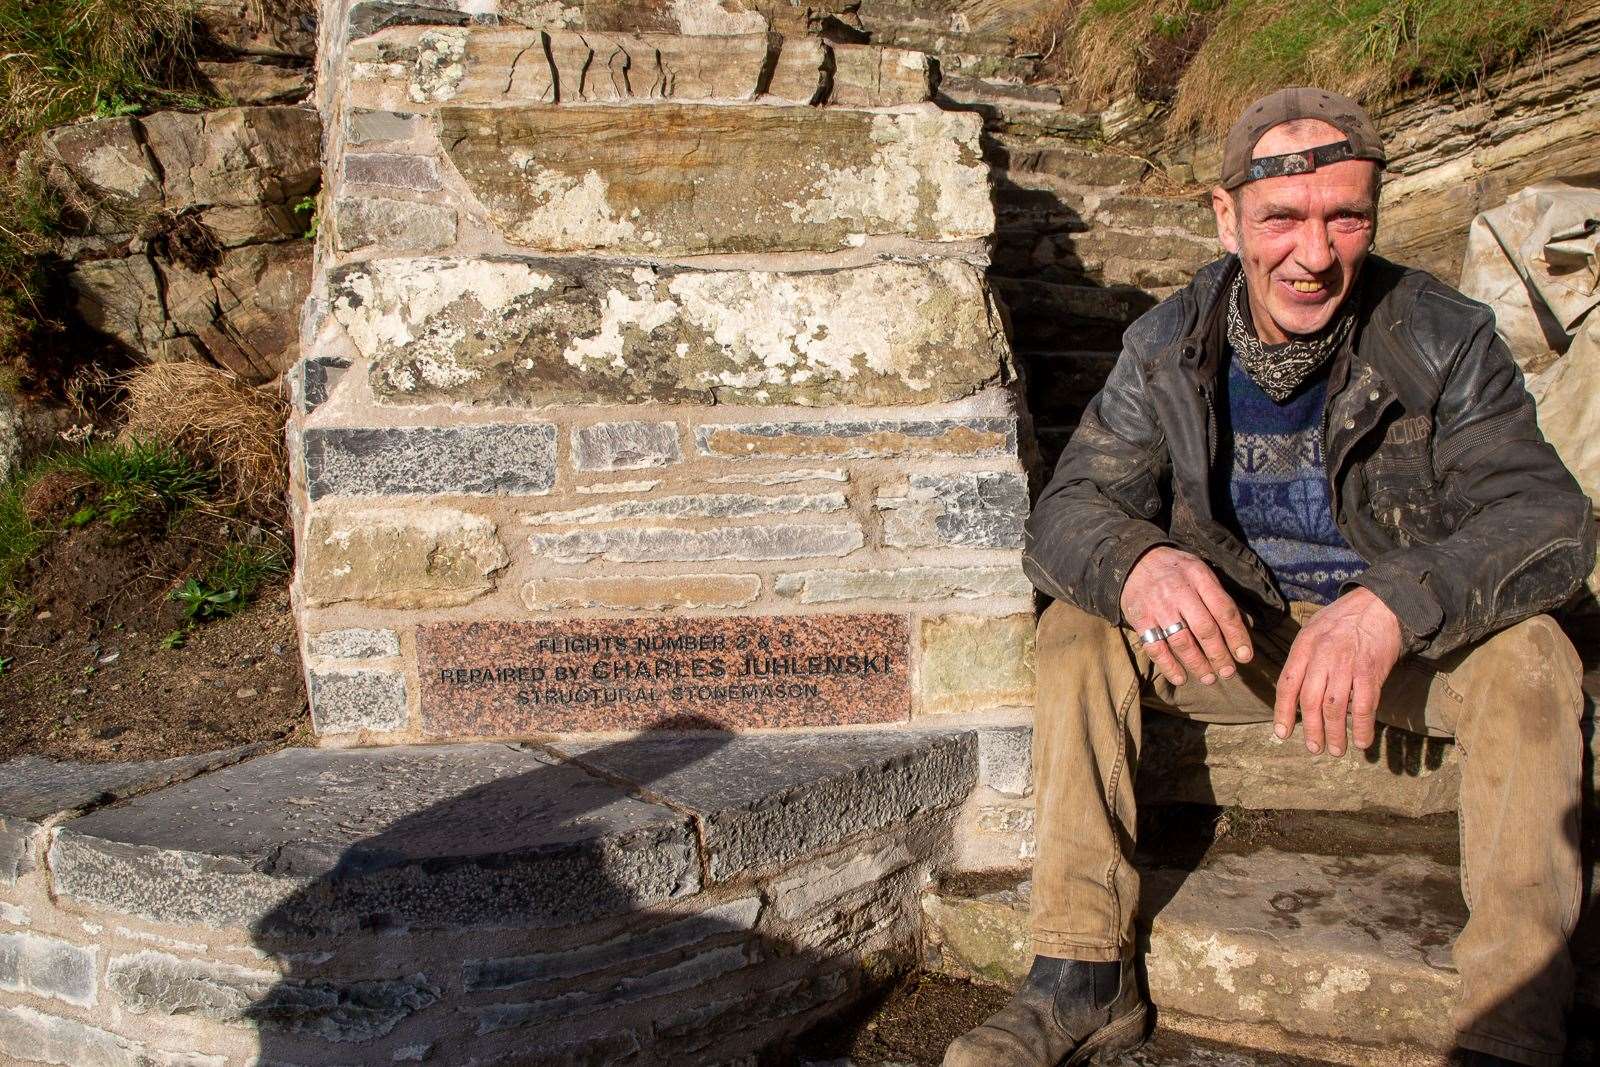 Grant Coghill took this photo of Charles Juhlenski, a stonemason who worked on the final repairs.